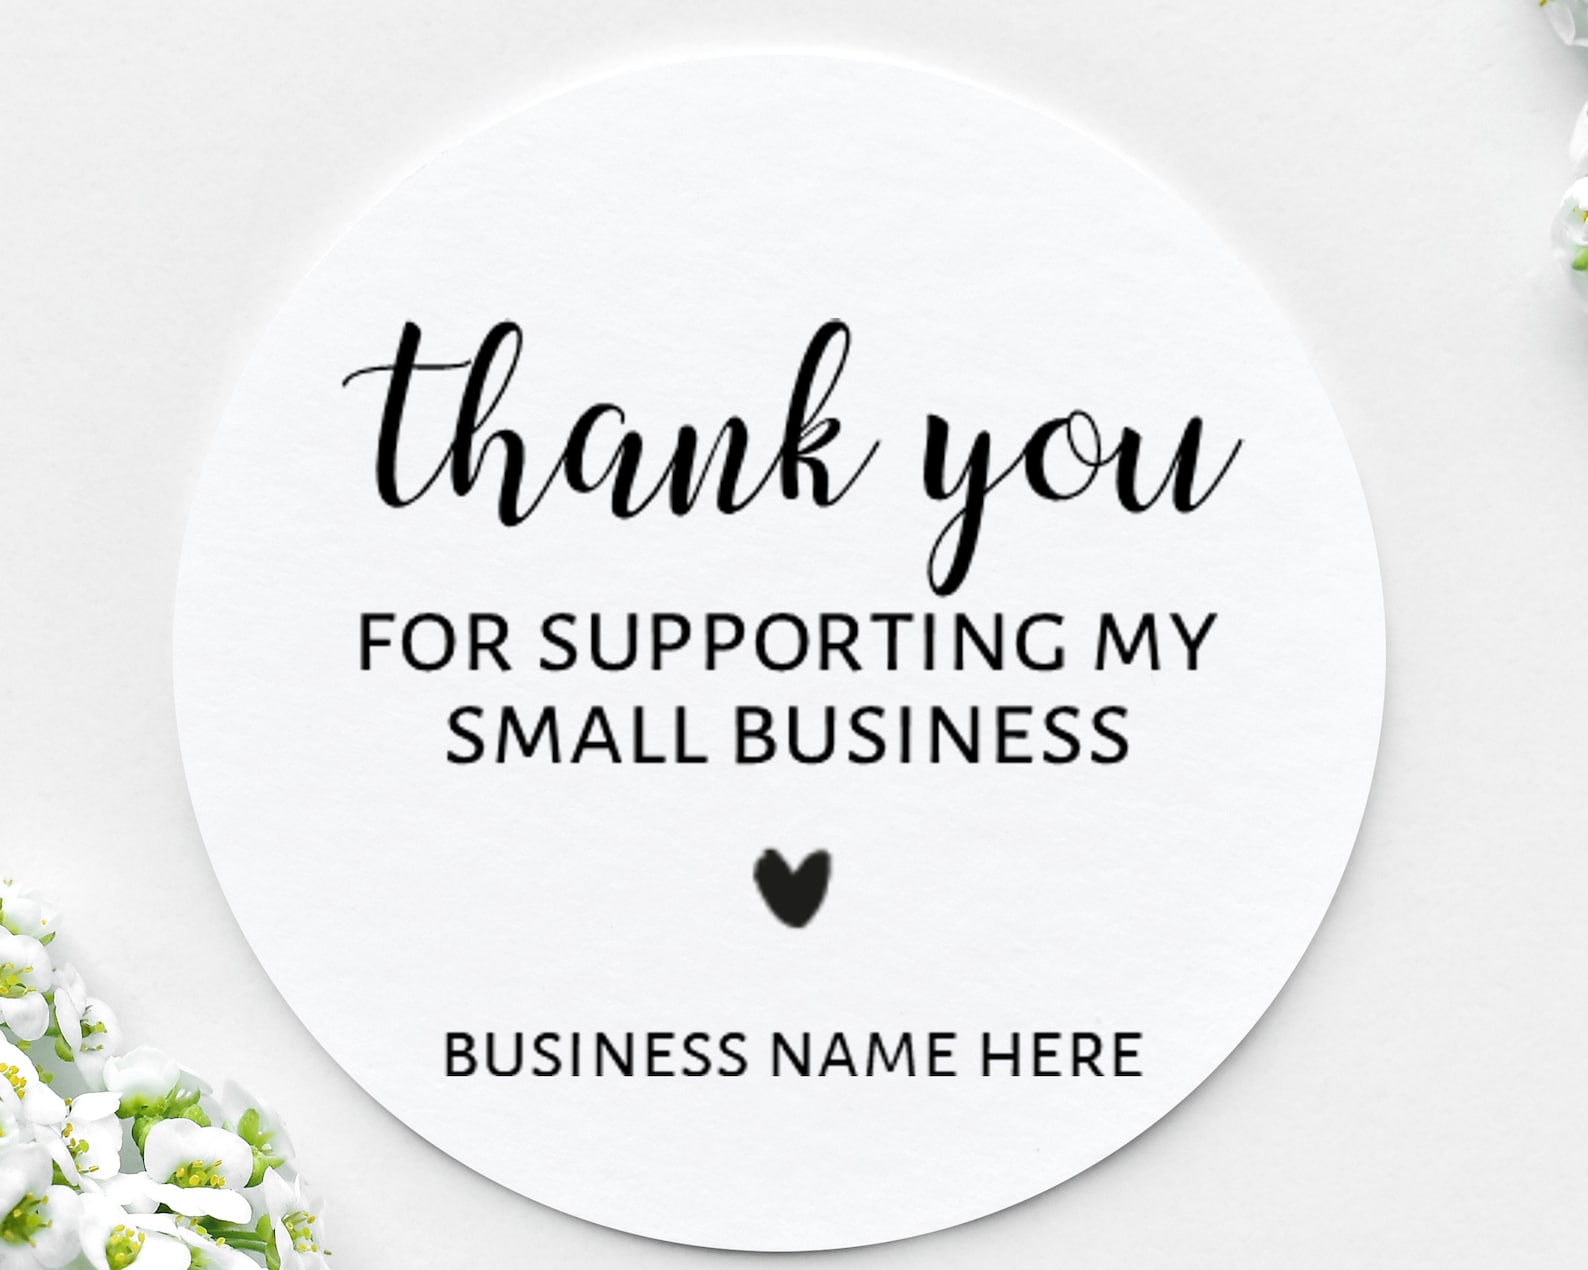 Thank you for supporting small Business. Thank you for supporting my small Business. Thank you for support my small Business. Логотип thank you for supporting my small Business.